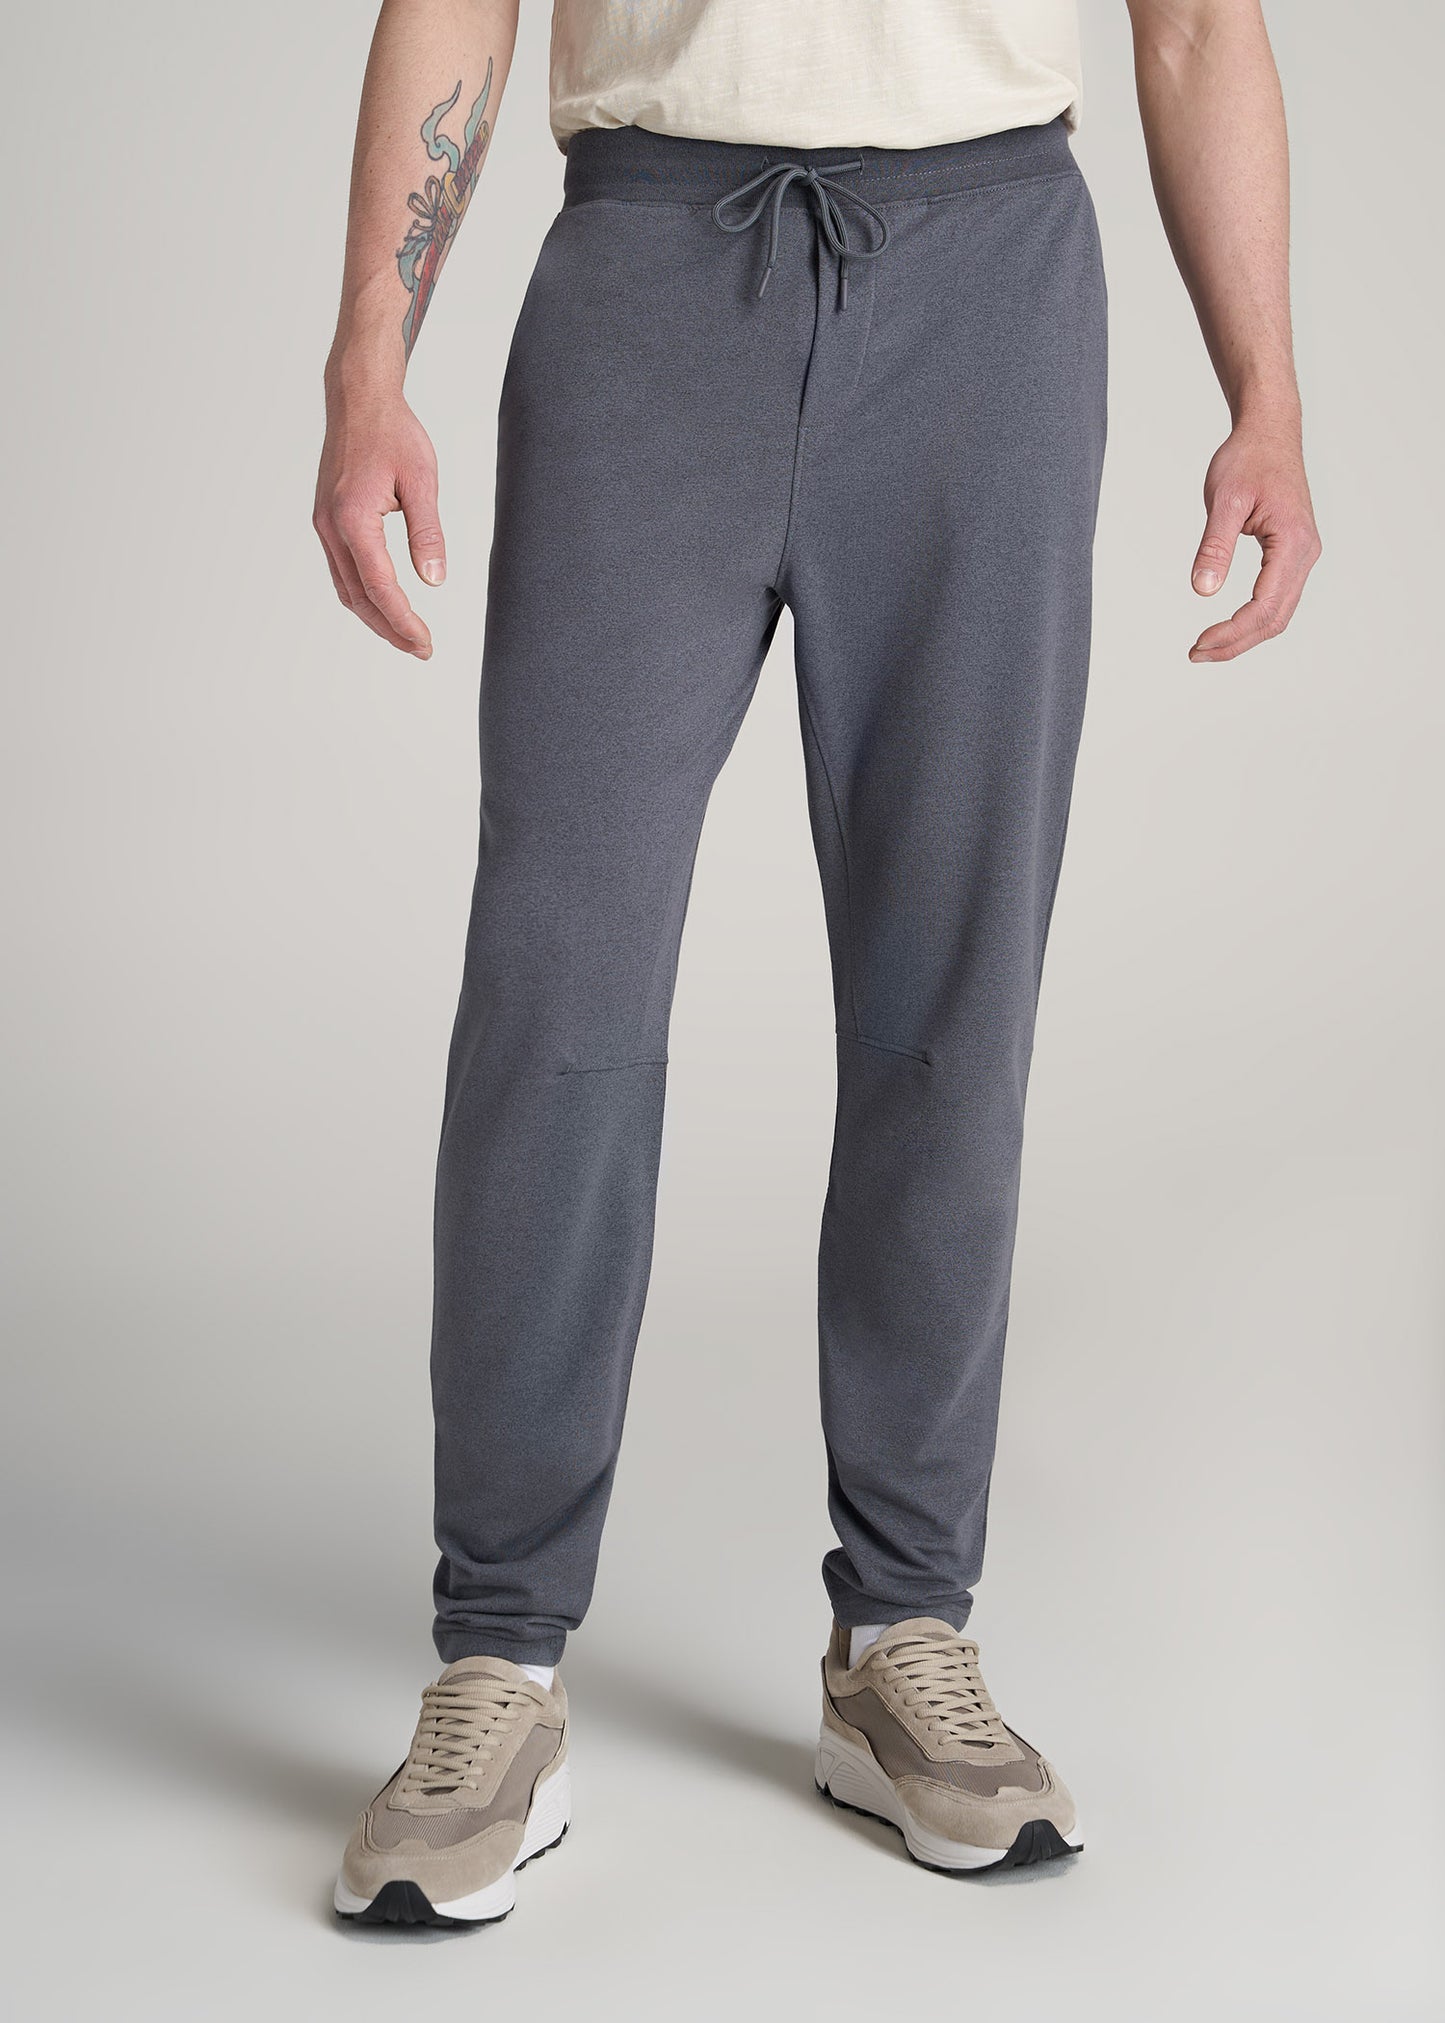 A tall man wearing American Tall's Performance French Terry Sweatpants for Tall Men in Charcoal Mix.